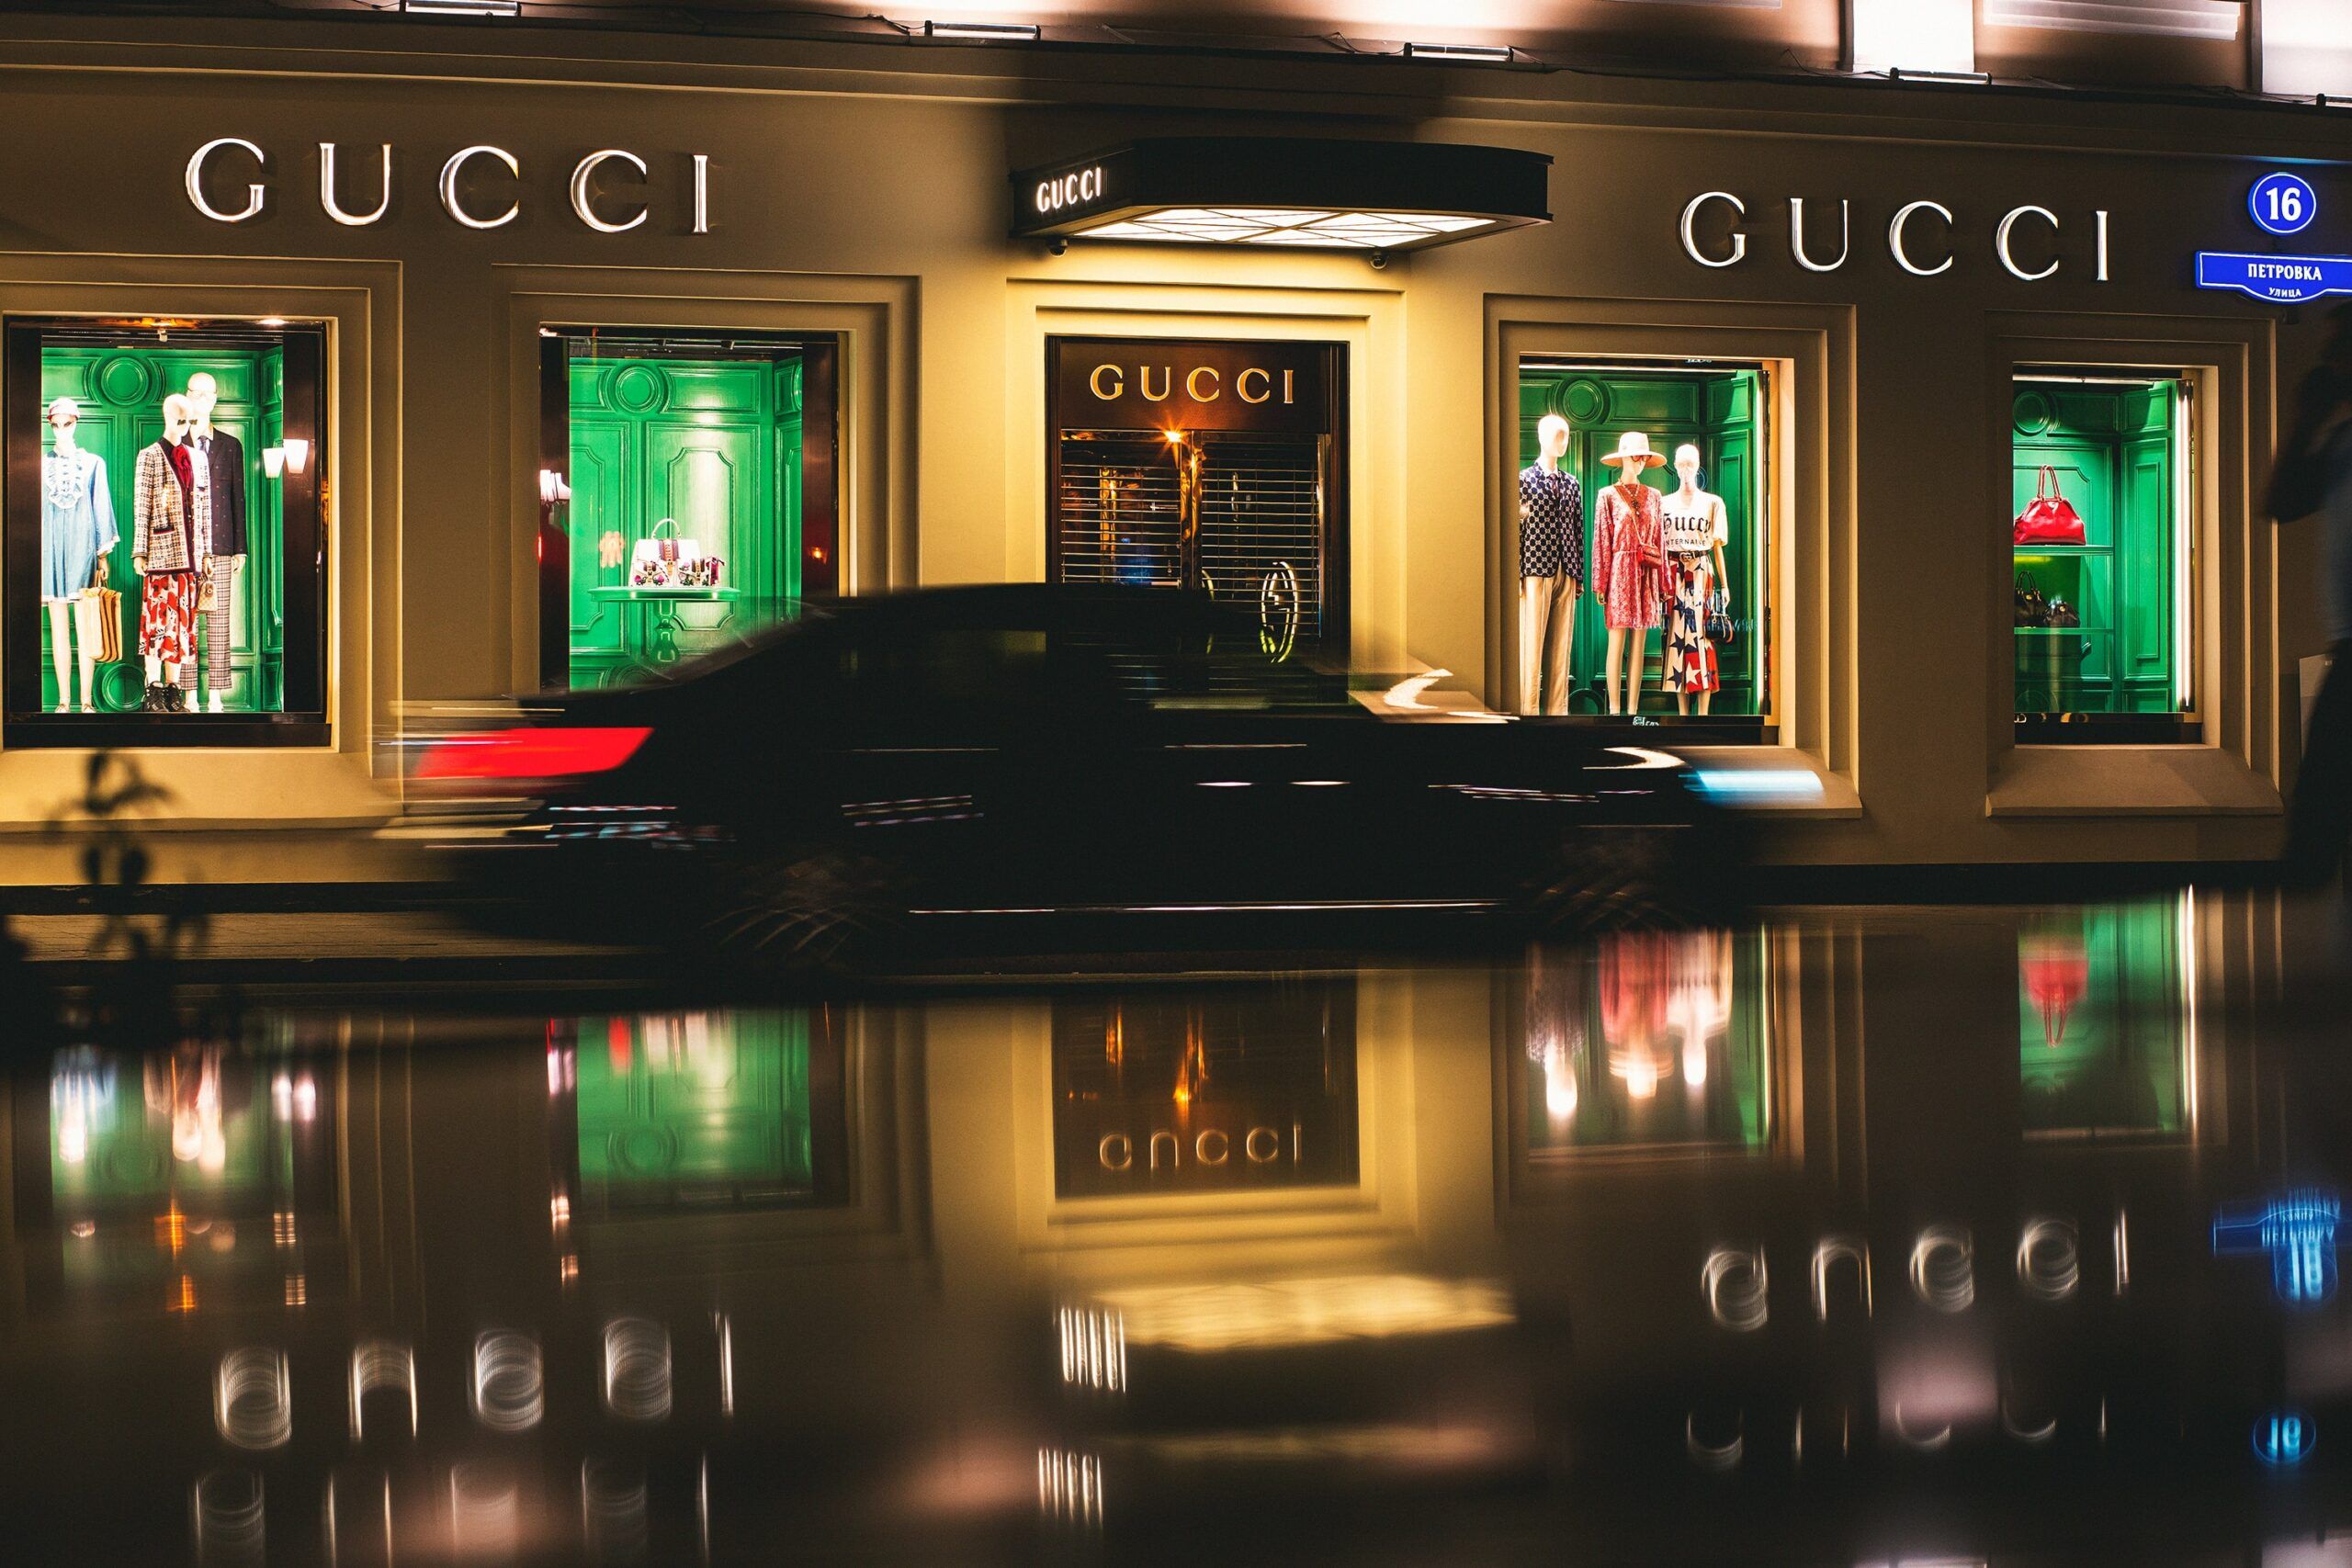 A Gucci store at night with green window displays and a black car driving past